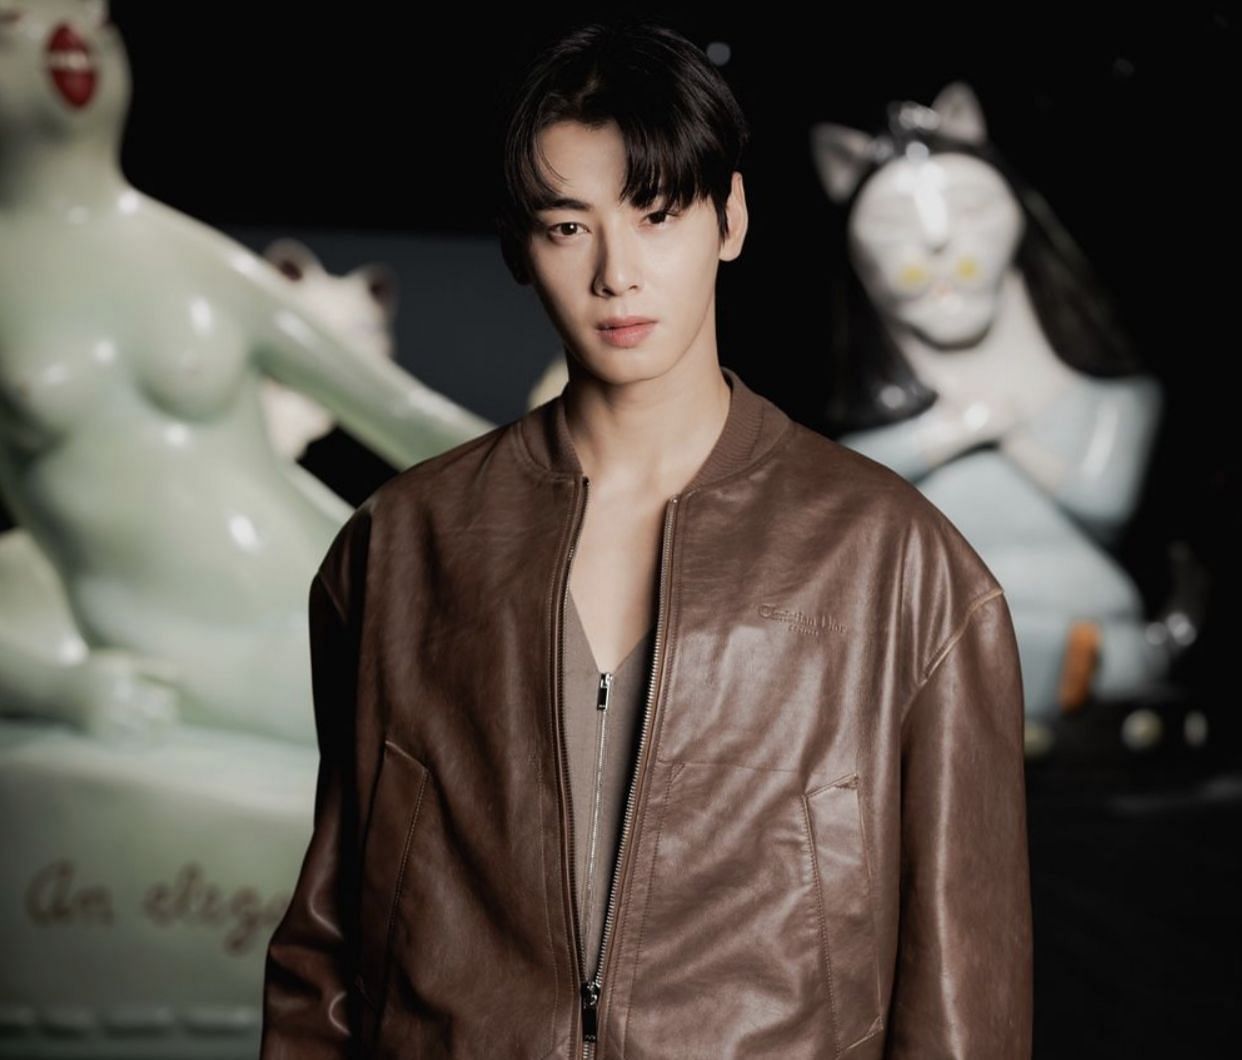 &ldquo;He looks very breathtaking&rdquo; - Fans swoon over Cha Eun-woo&rsquo;s look for the DIOR Paris Fashion Week show (Image via @dior/Instagram))